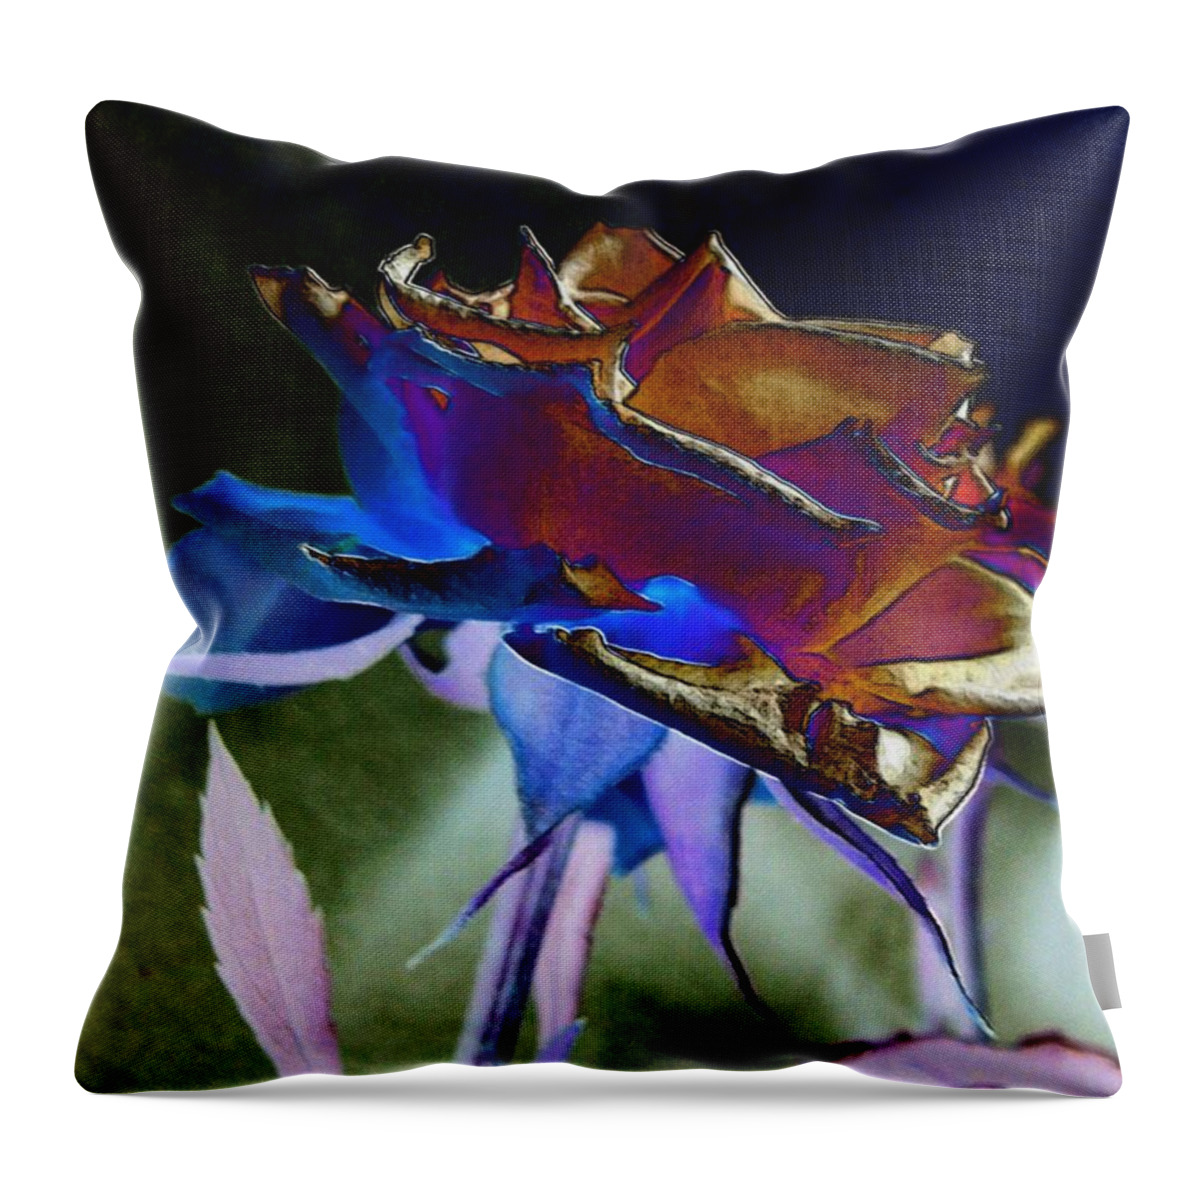 Rose Throw Pillow featuring the photograph Rose by Design by Kae Cheatham